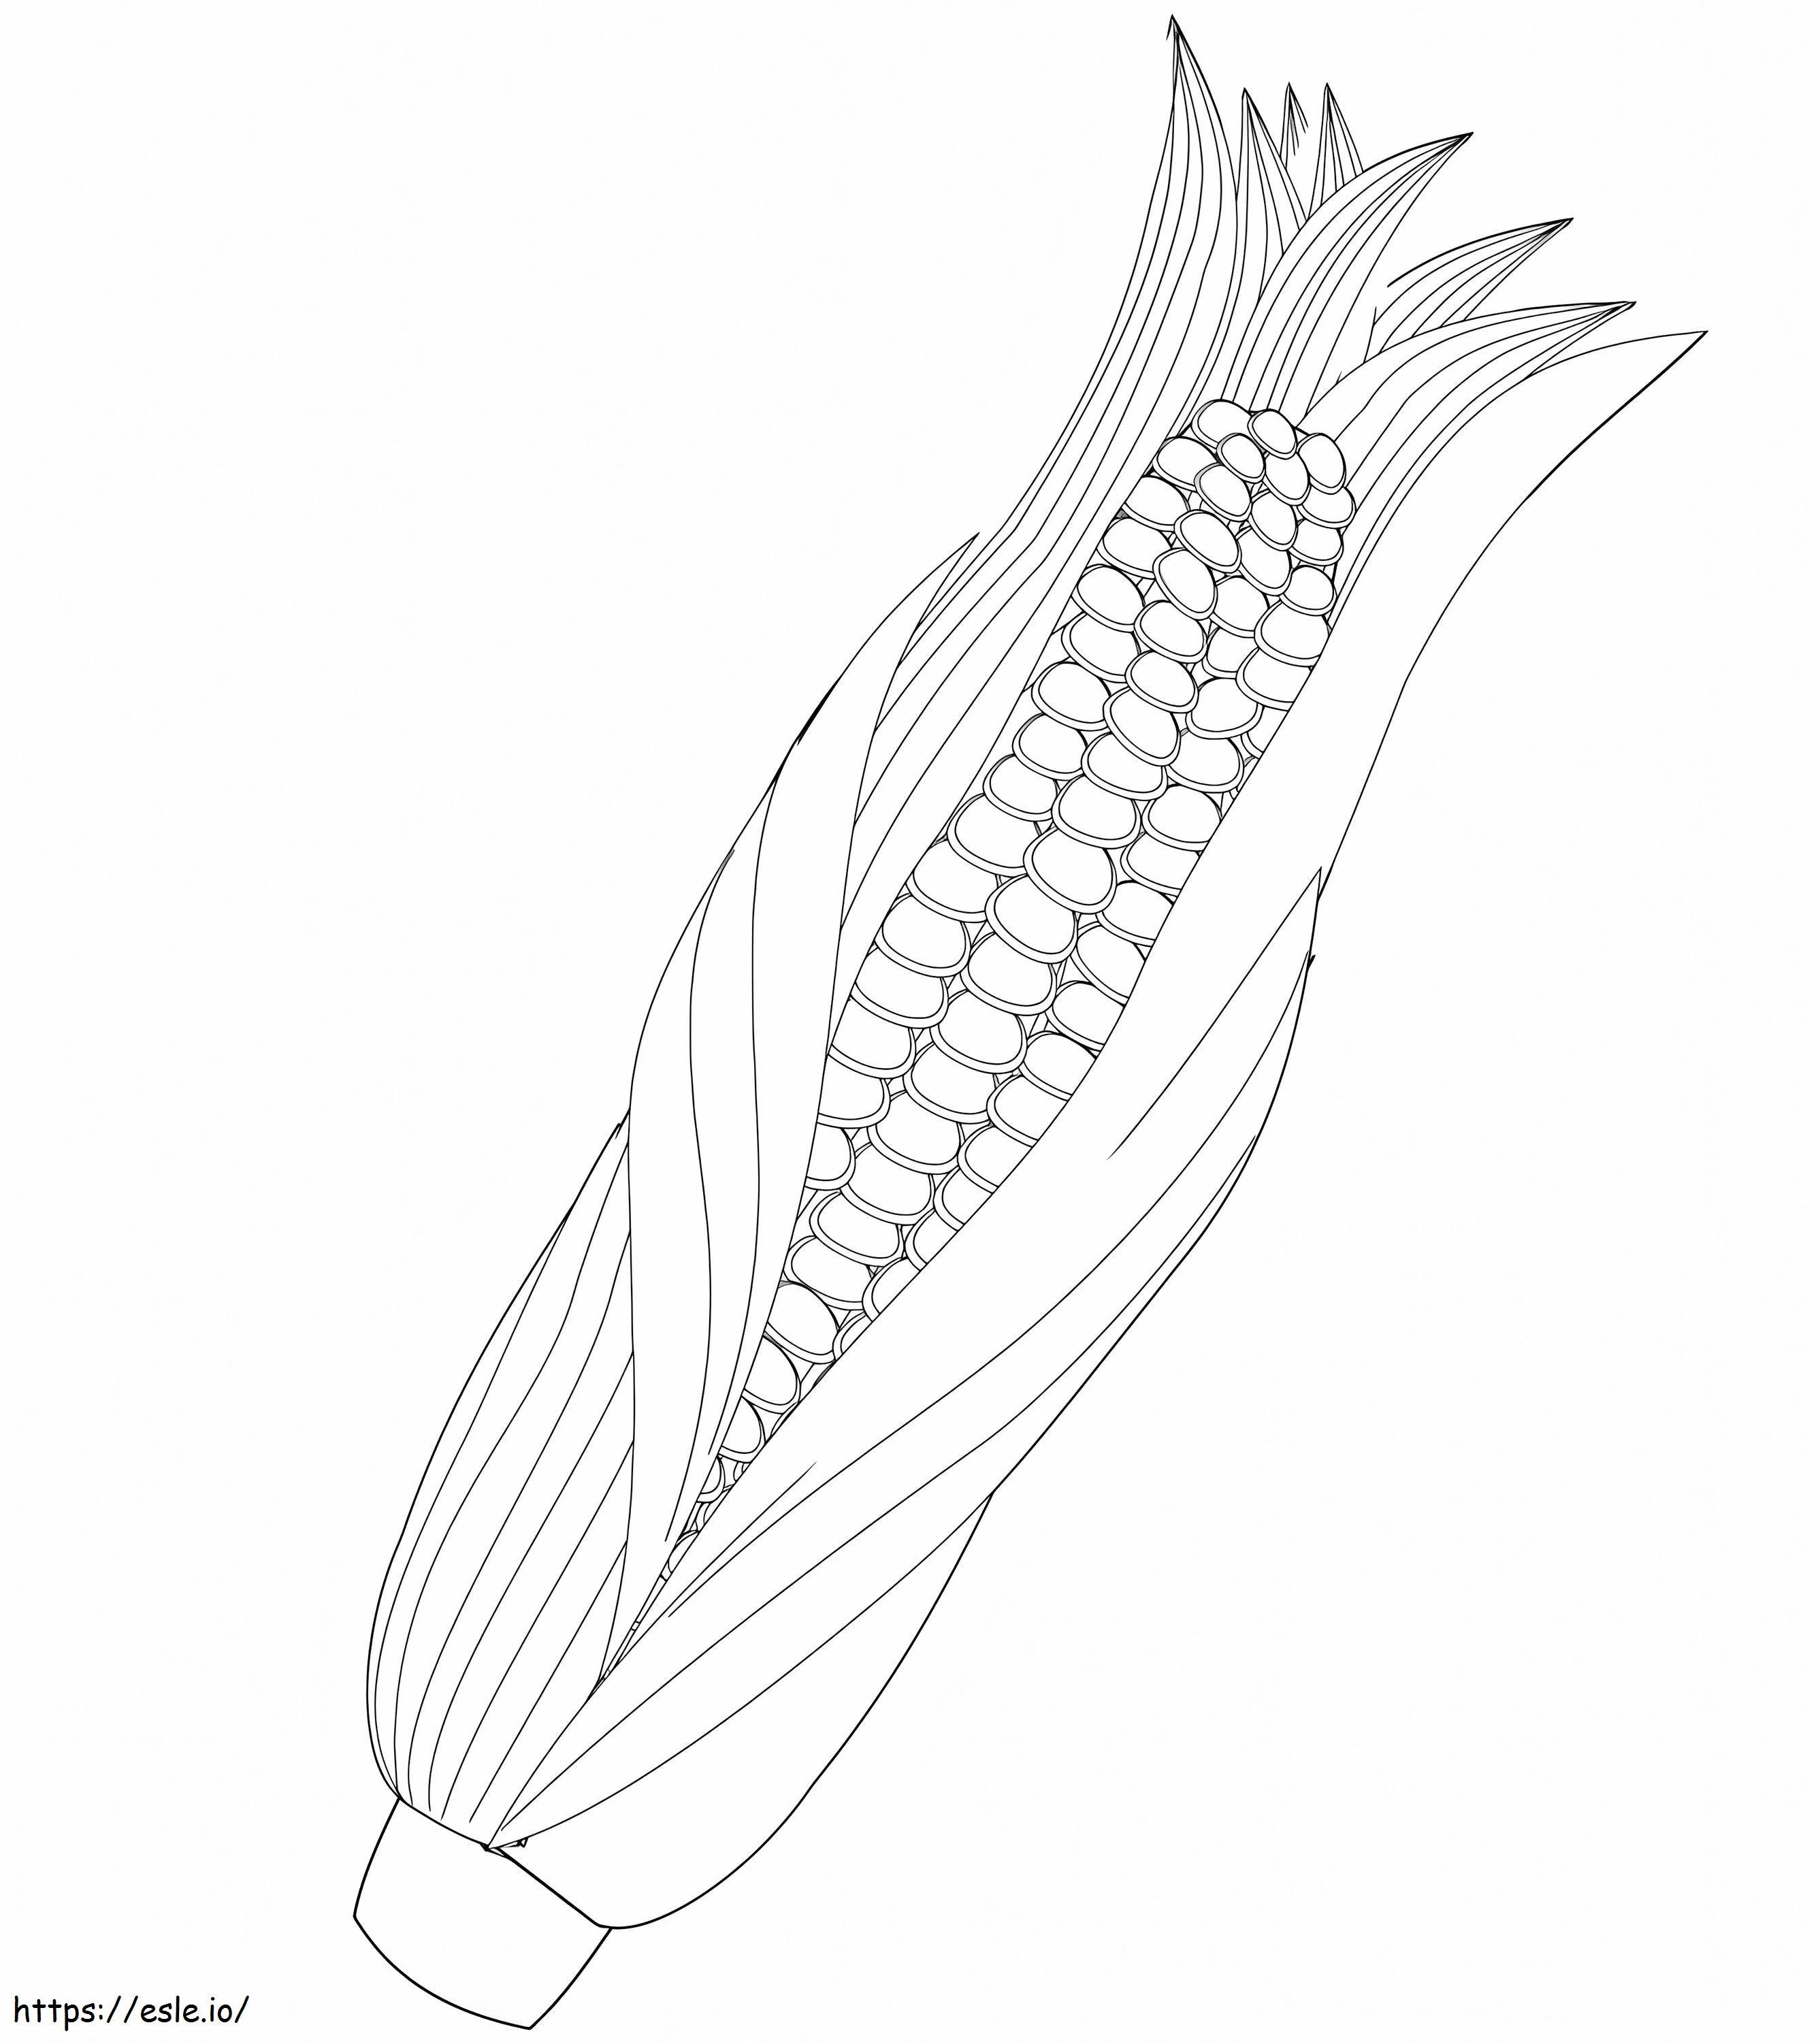 Maize A4 coloring page